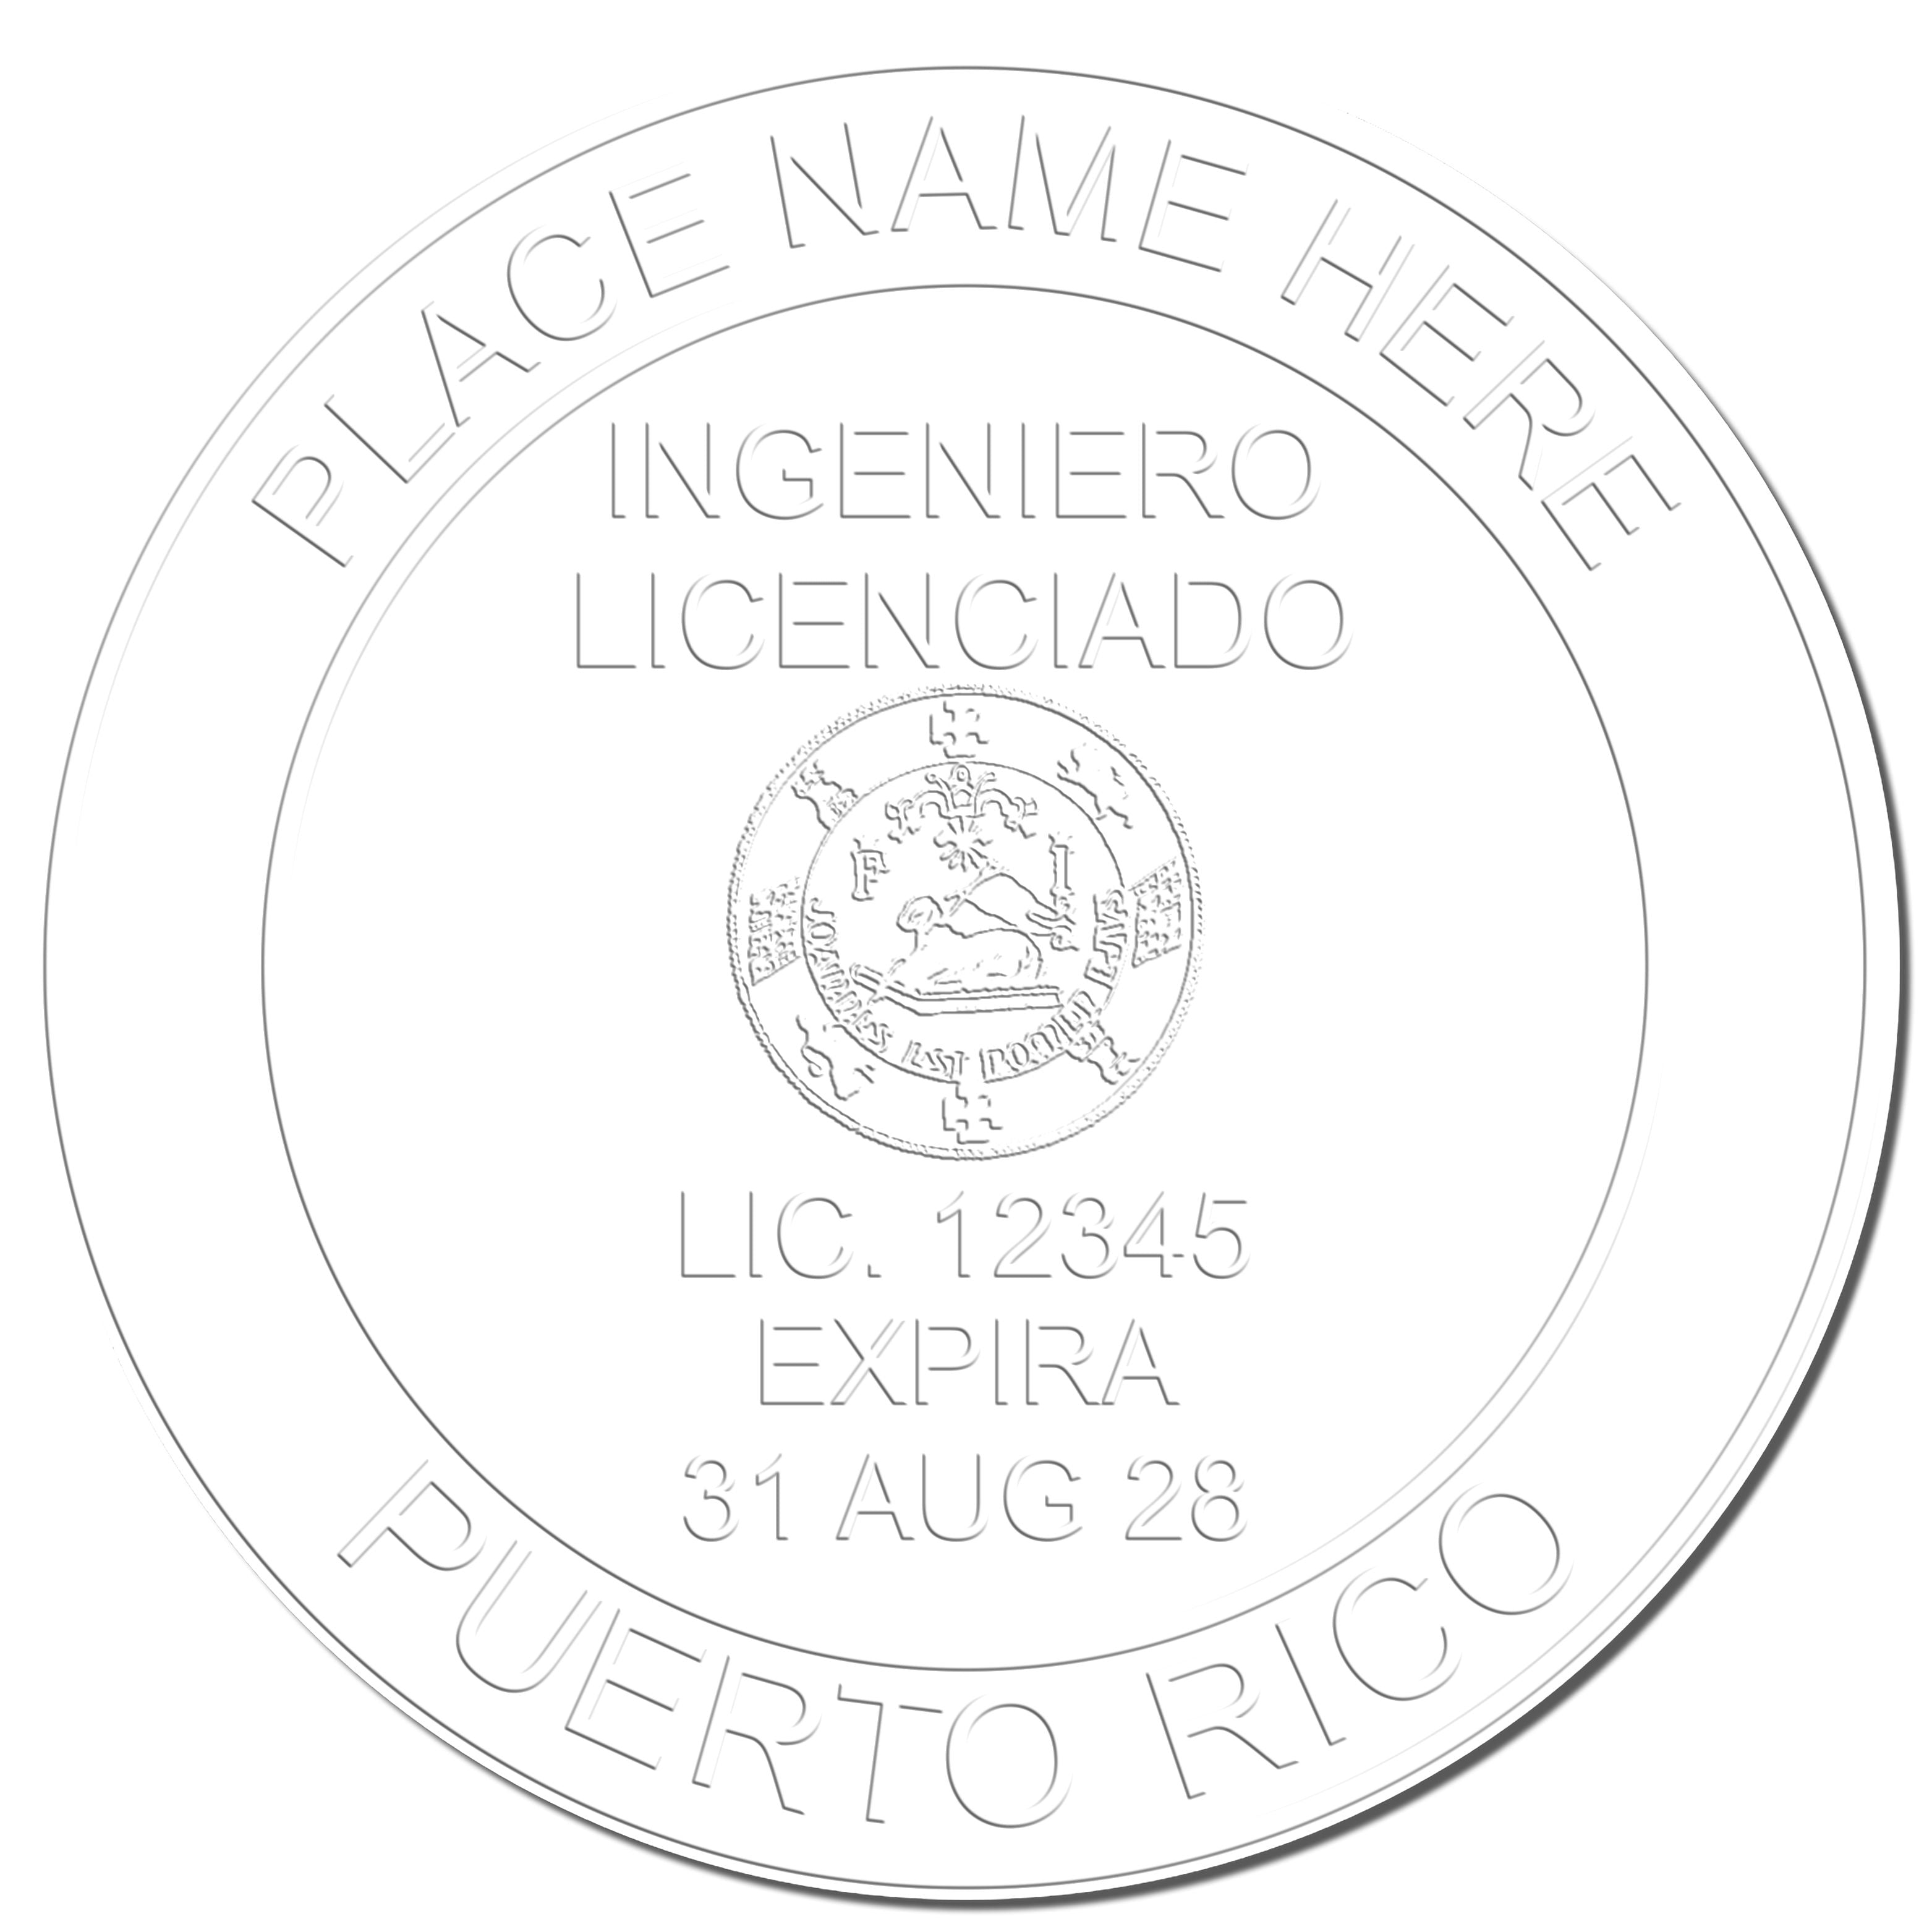 The Long Reach Puerto Rico PE Seal stamp impression comes to life with a crisp, detailed photo on paper - showcasing true professional quality.